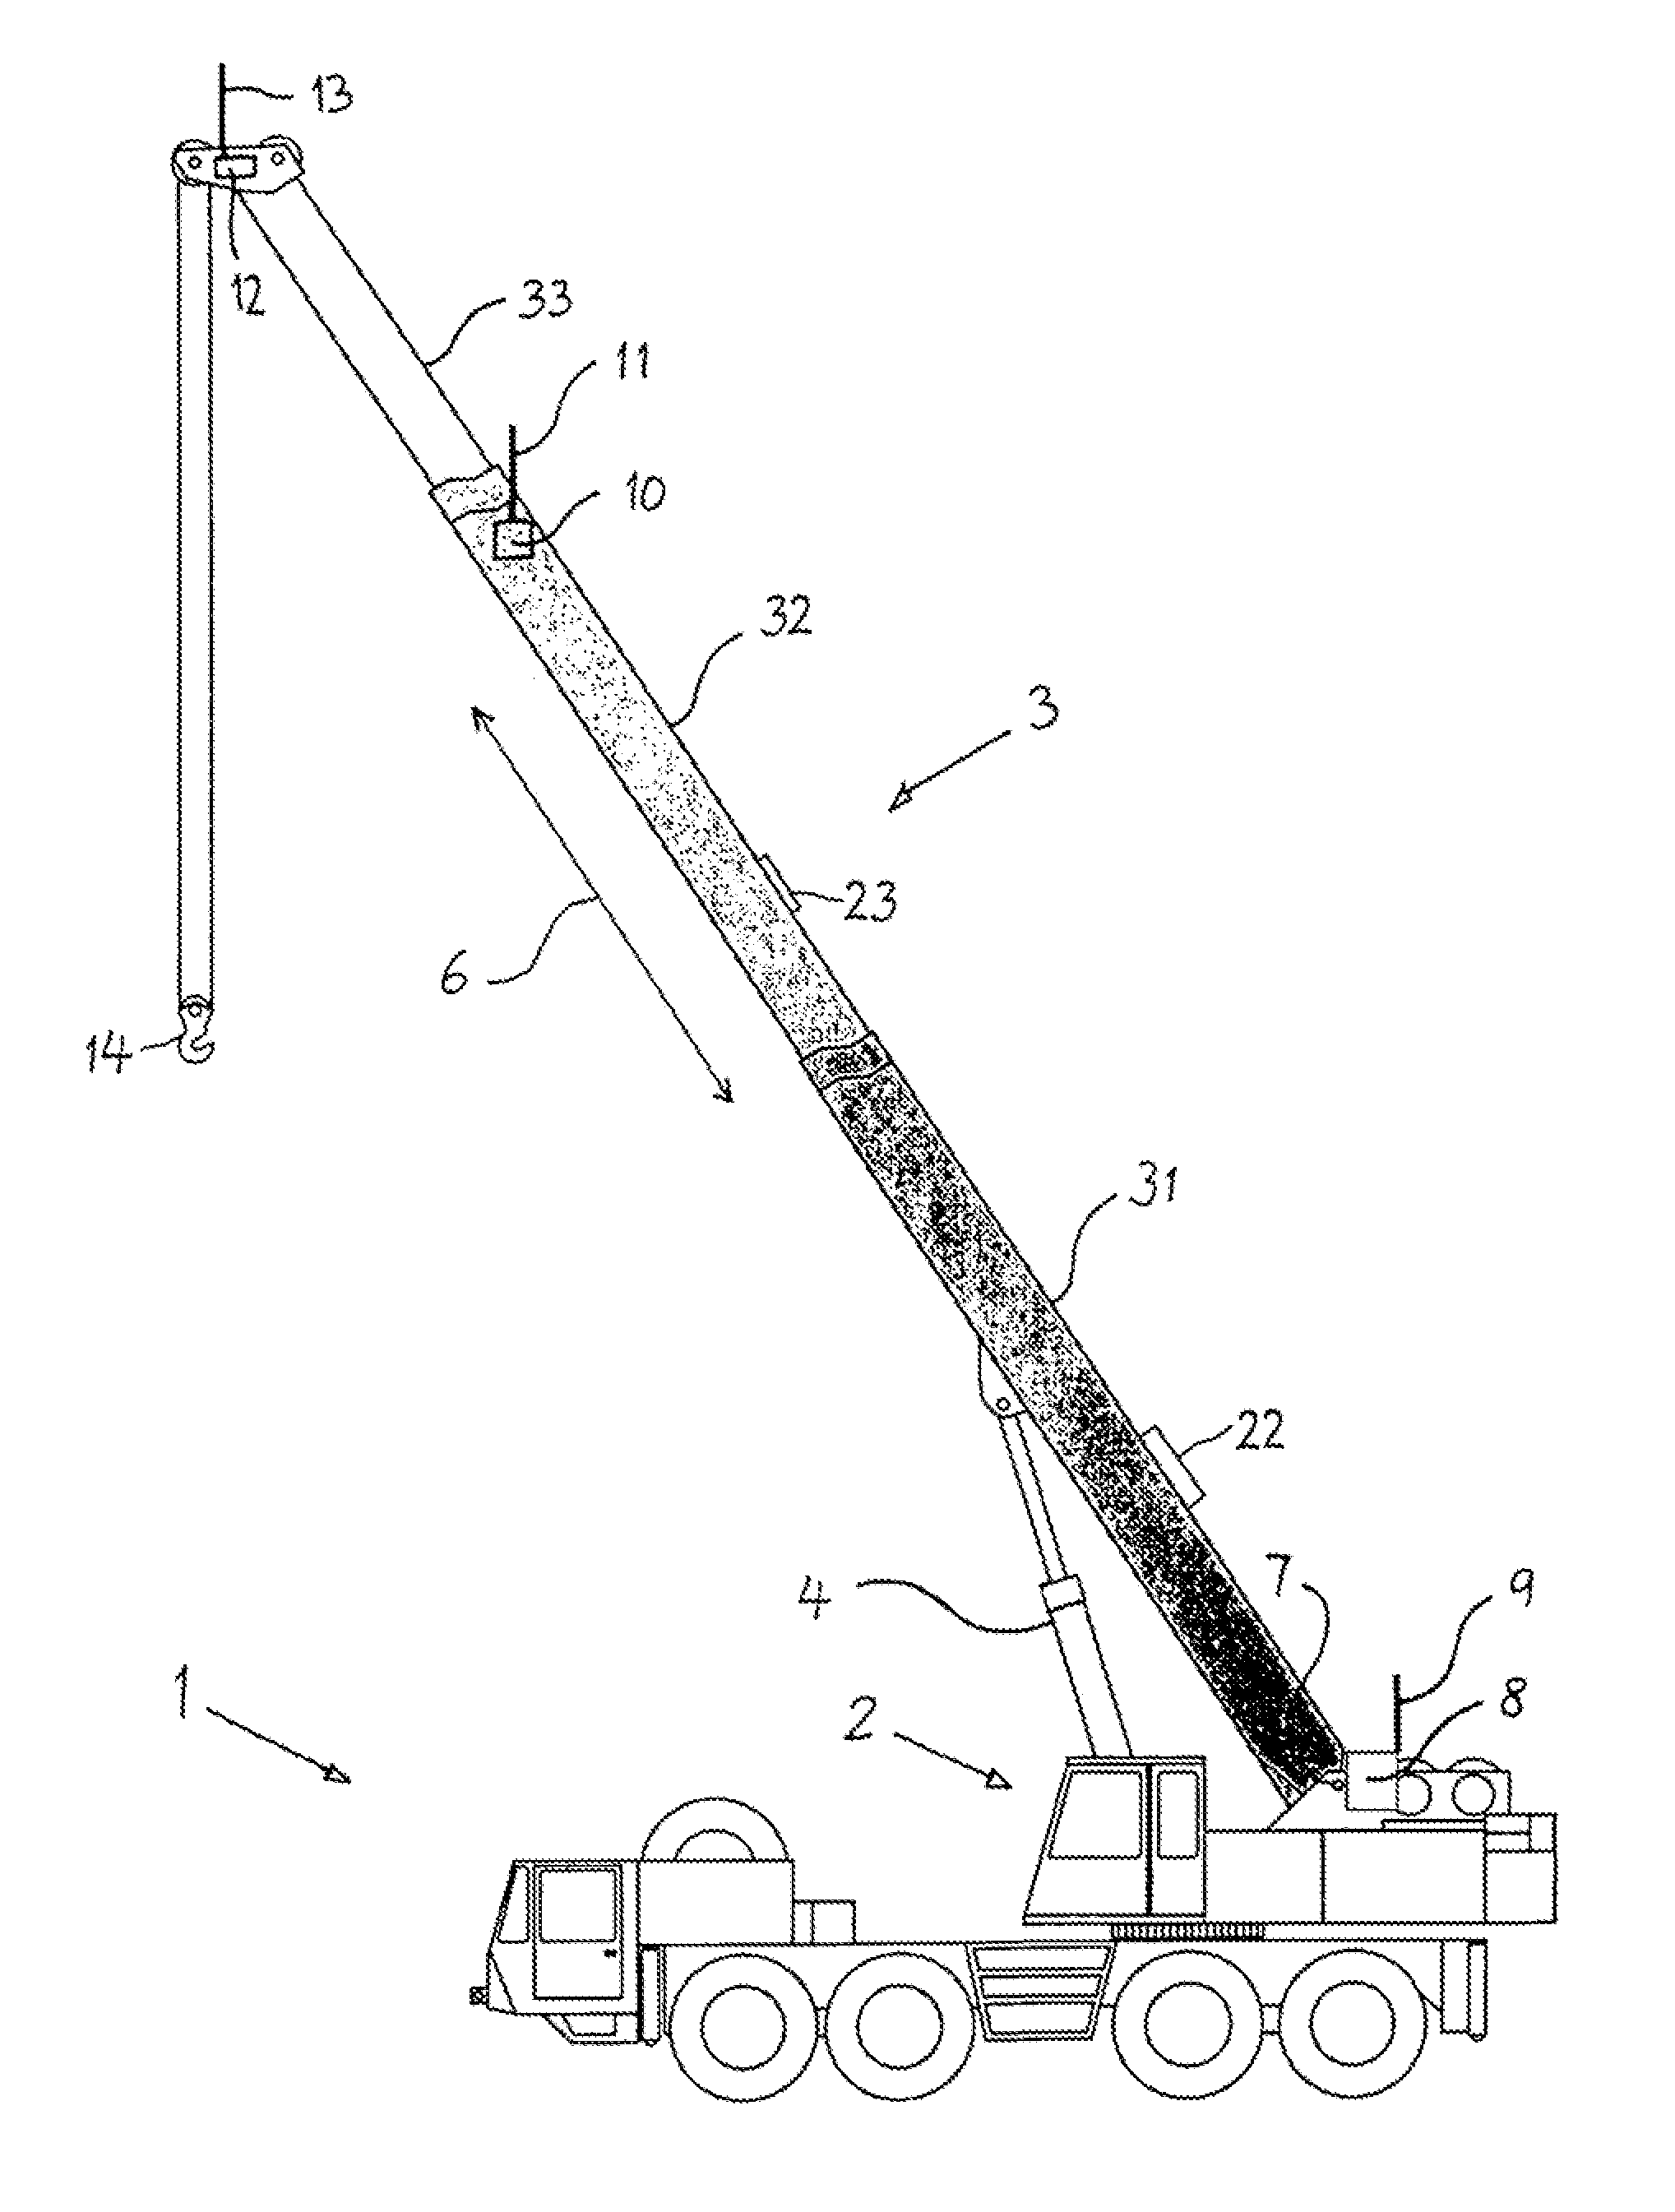 Mobile or stationary working apparatus with telescopic extension arm elements whose position in relation to one another is detected by RFID technology